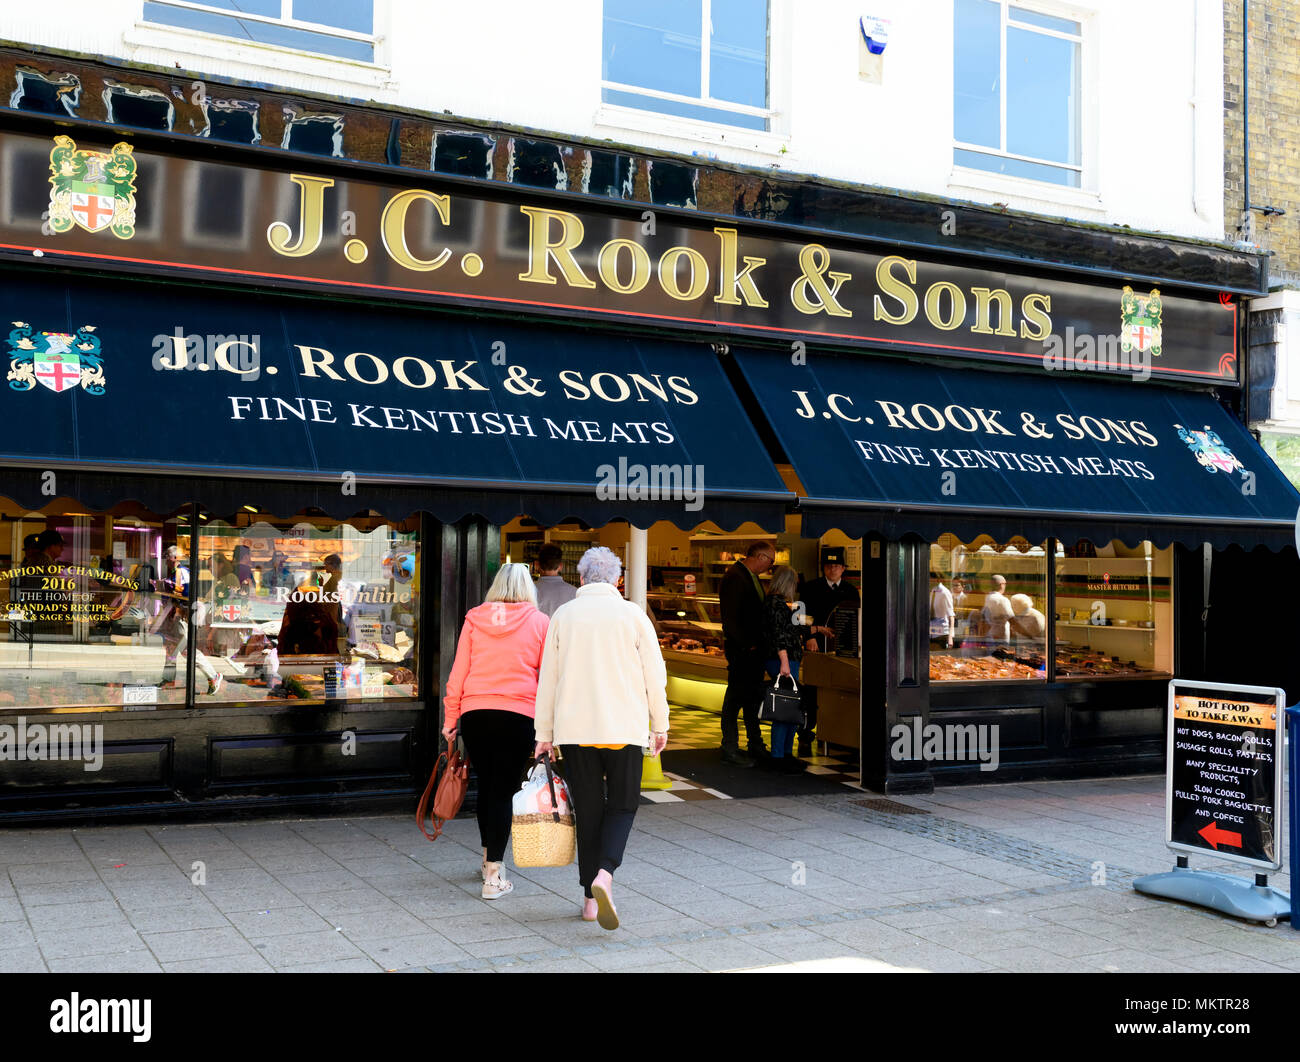 J C Rook and sons, a high quality chain of independent family butcher shops throughout Kent. Stock Photo